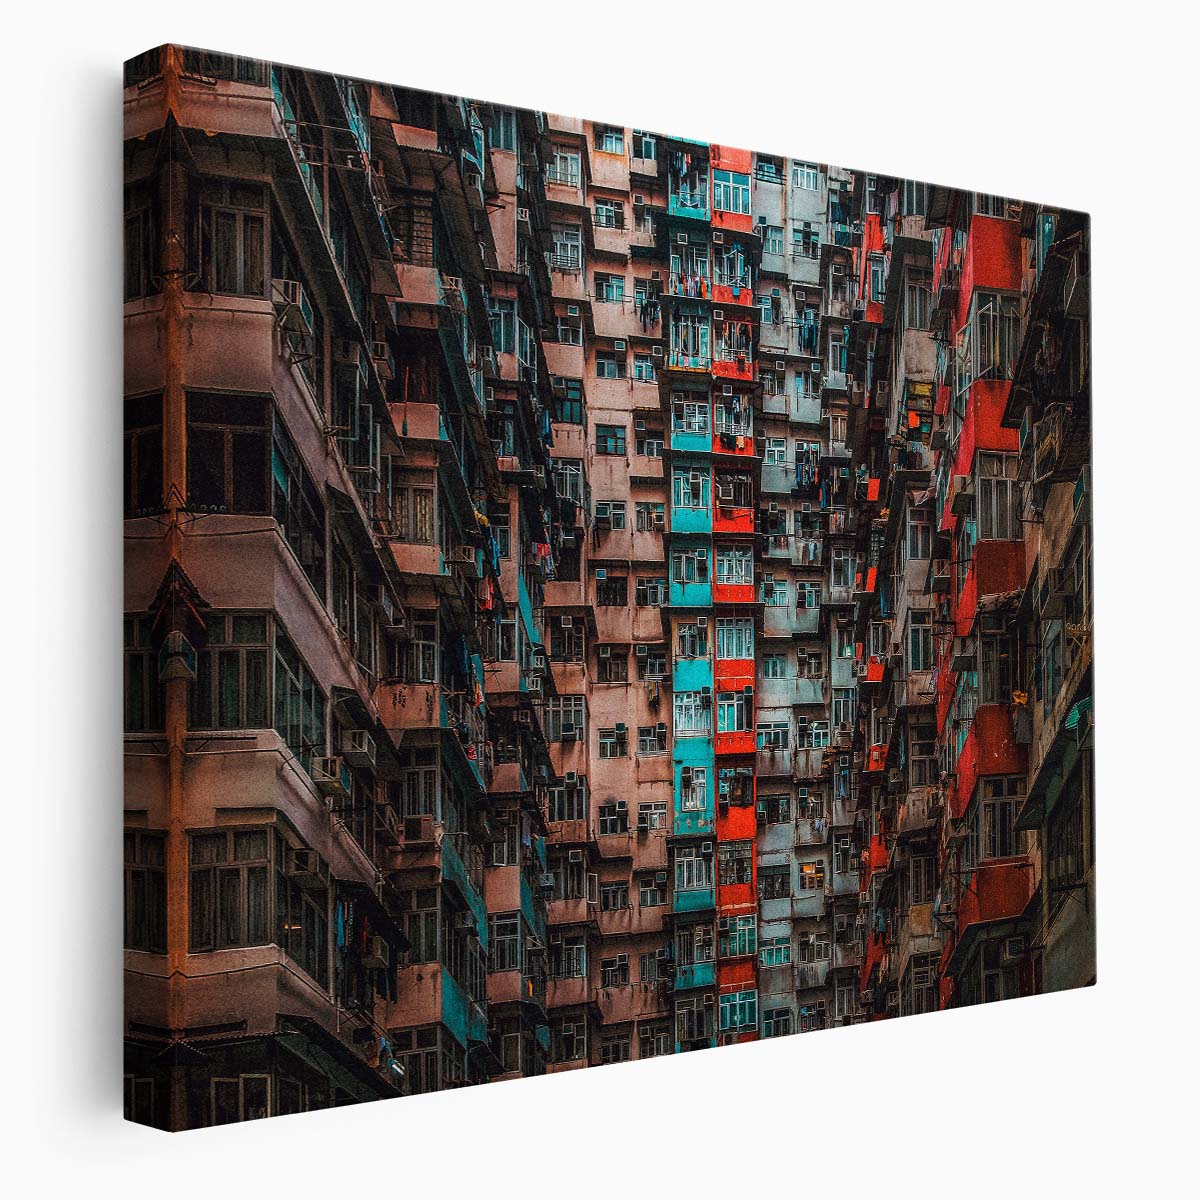 Colorful Hong Kong Street Scene Architecture Wall Art by Luxuriance Designs. Made in USA.